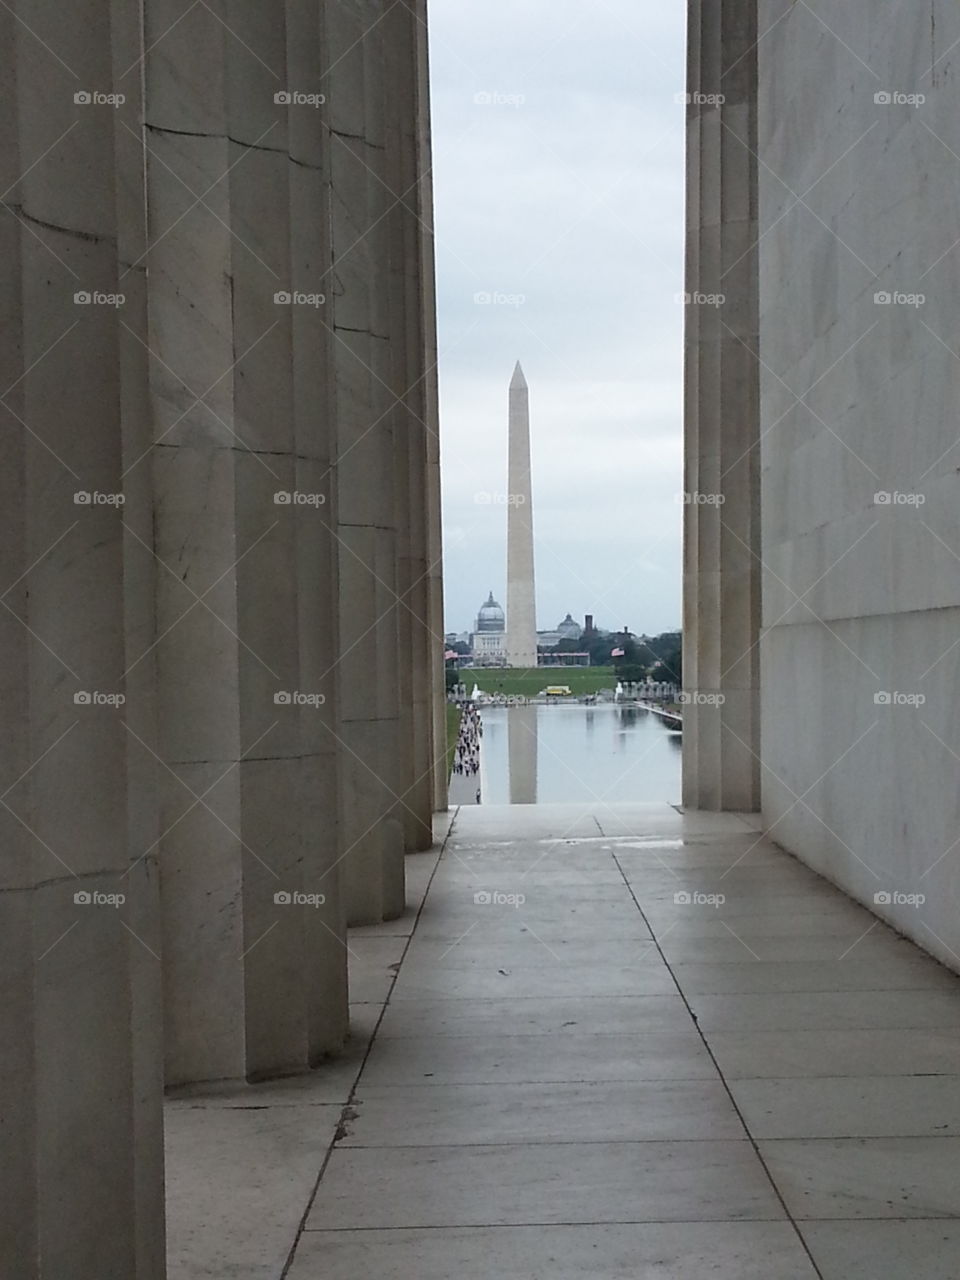 Washington monument from Lincoln's